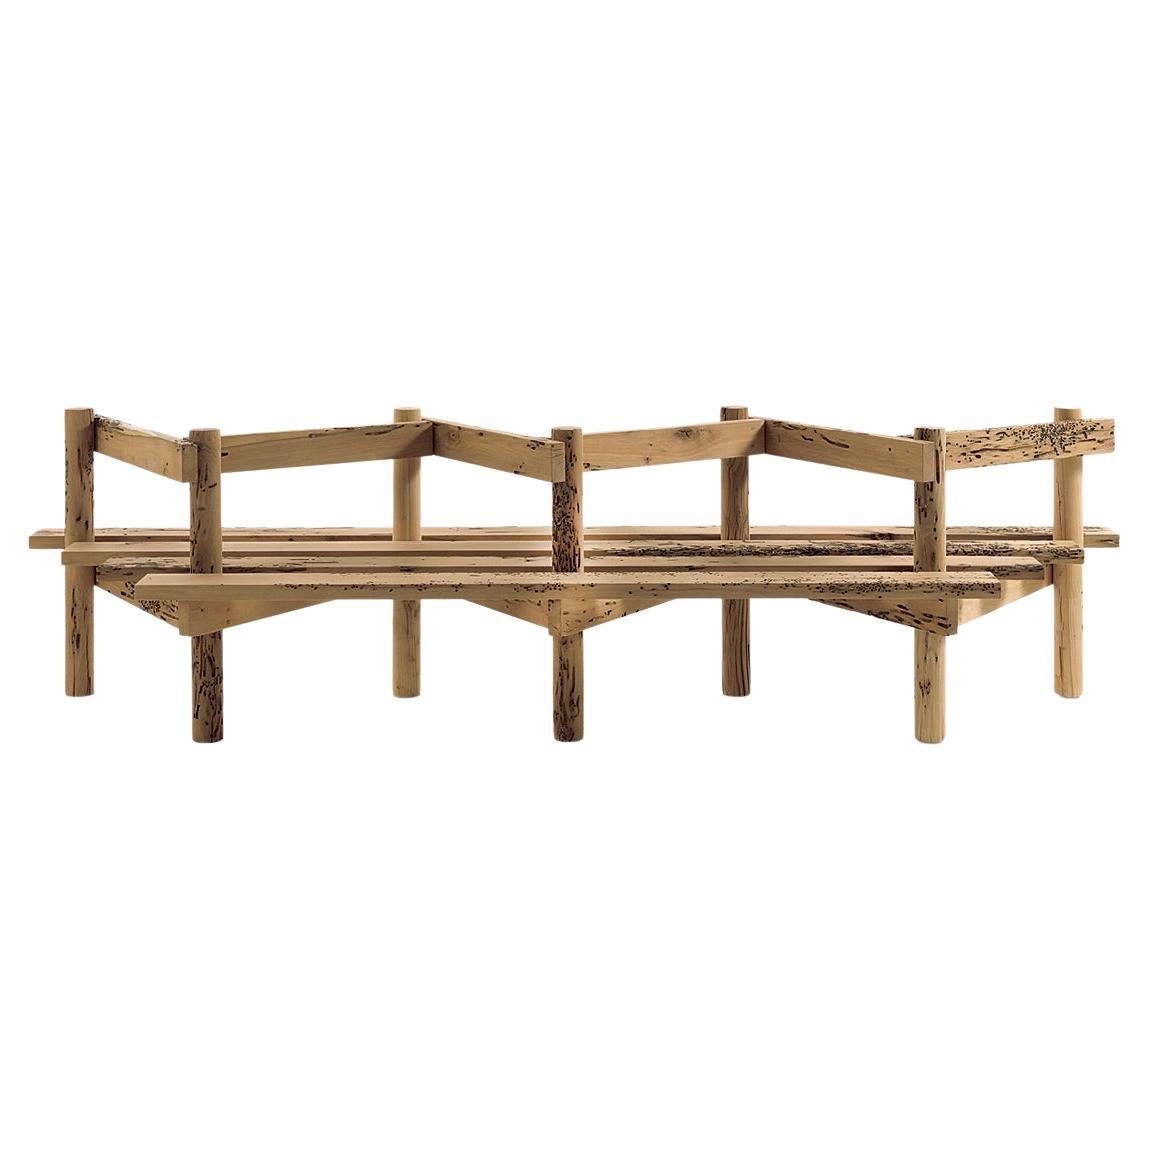 Palizzata Briccola Wood Bench by Michele De Lucchi, Made in Italy For Sale